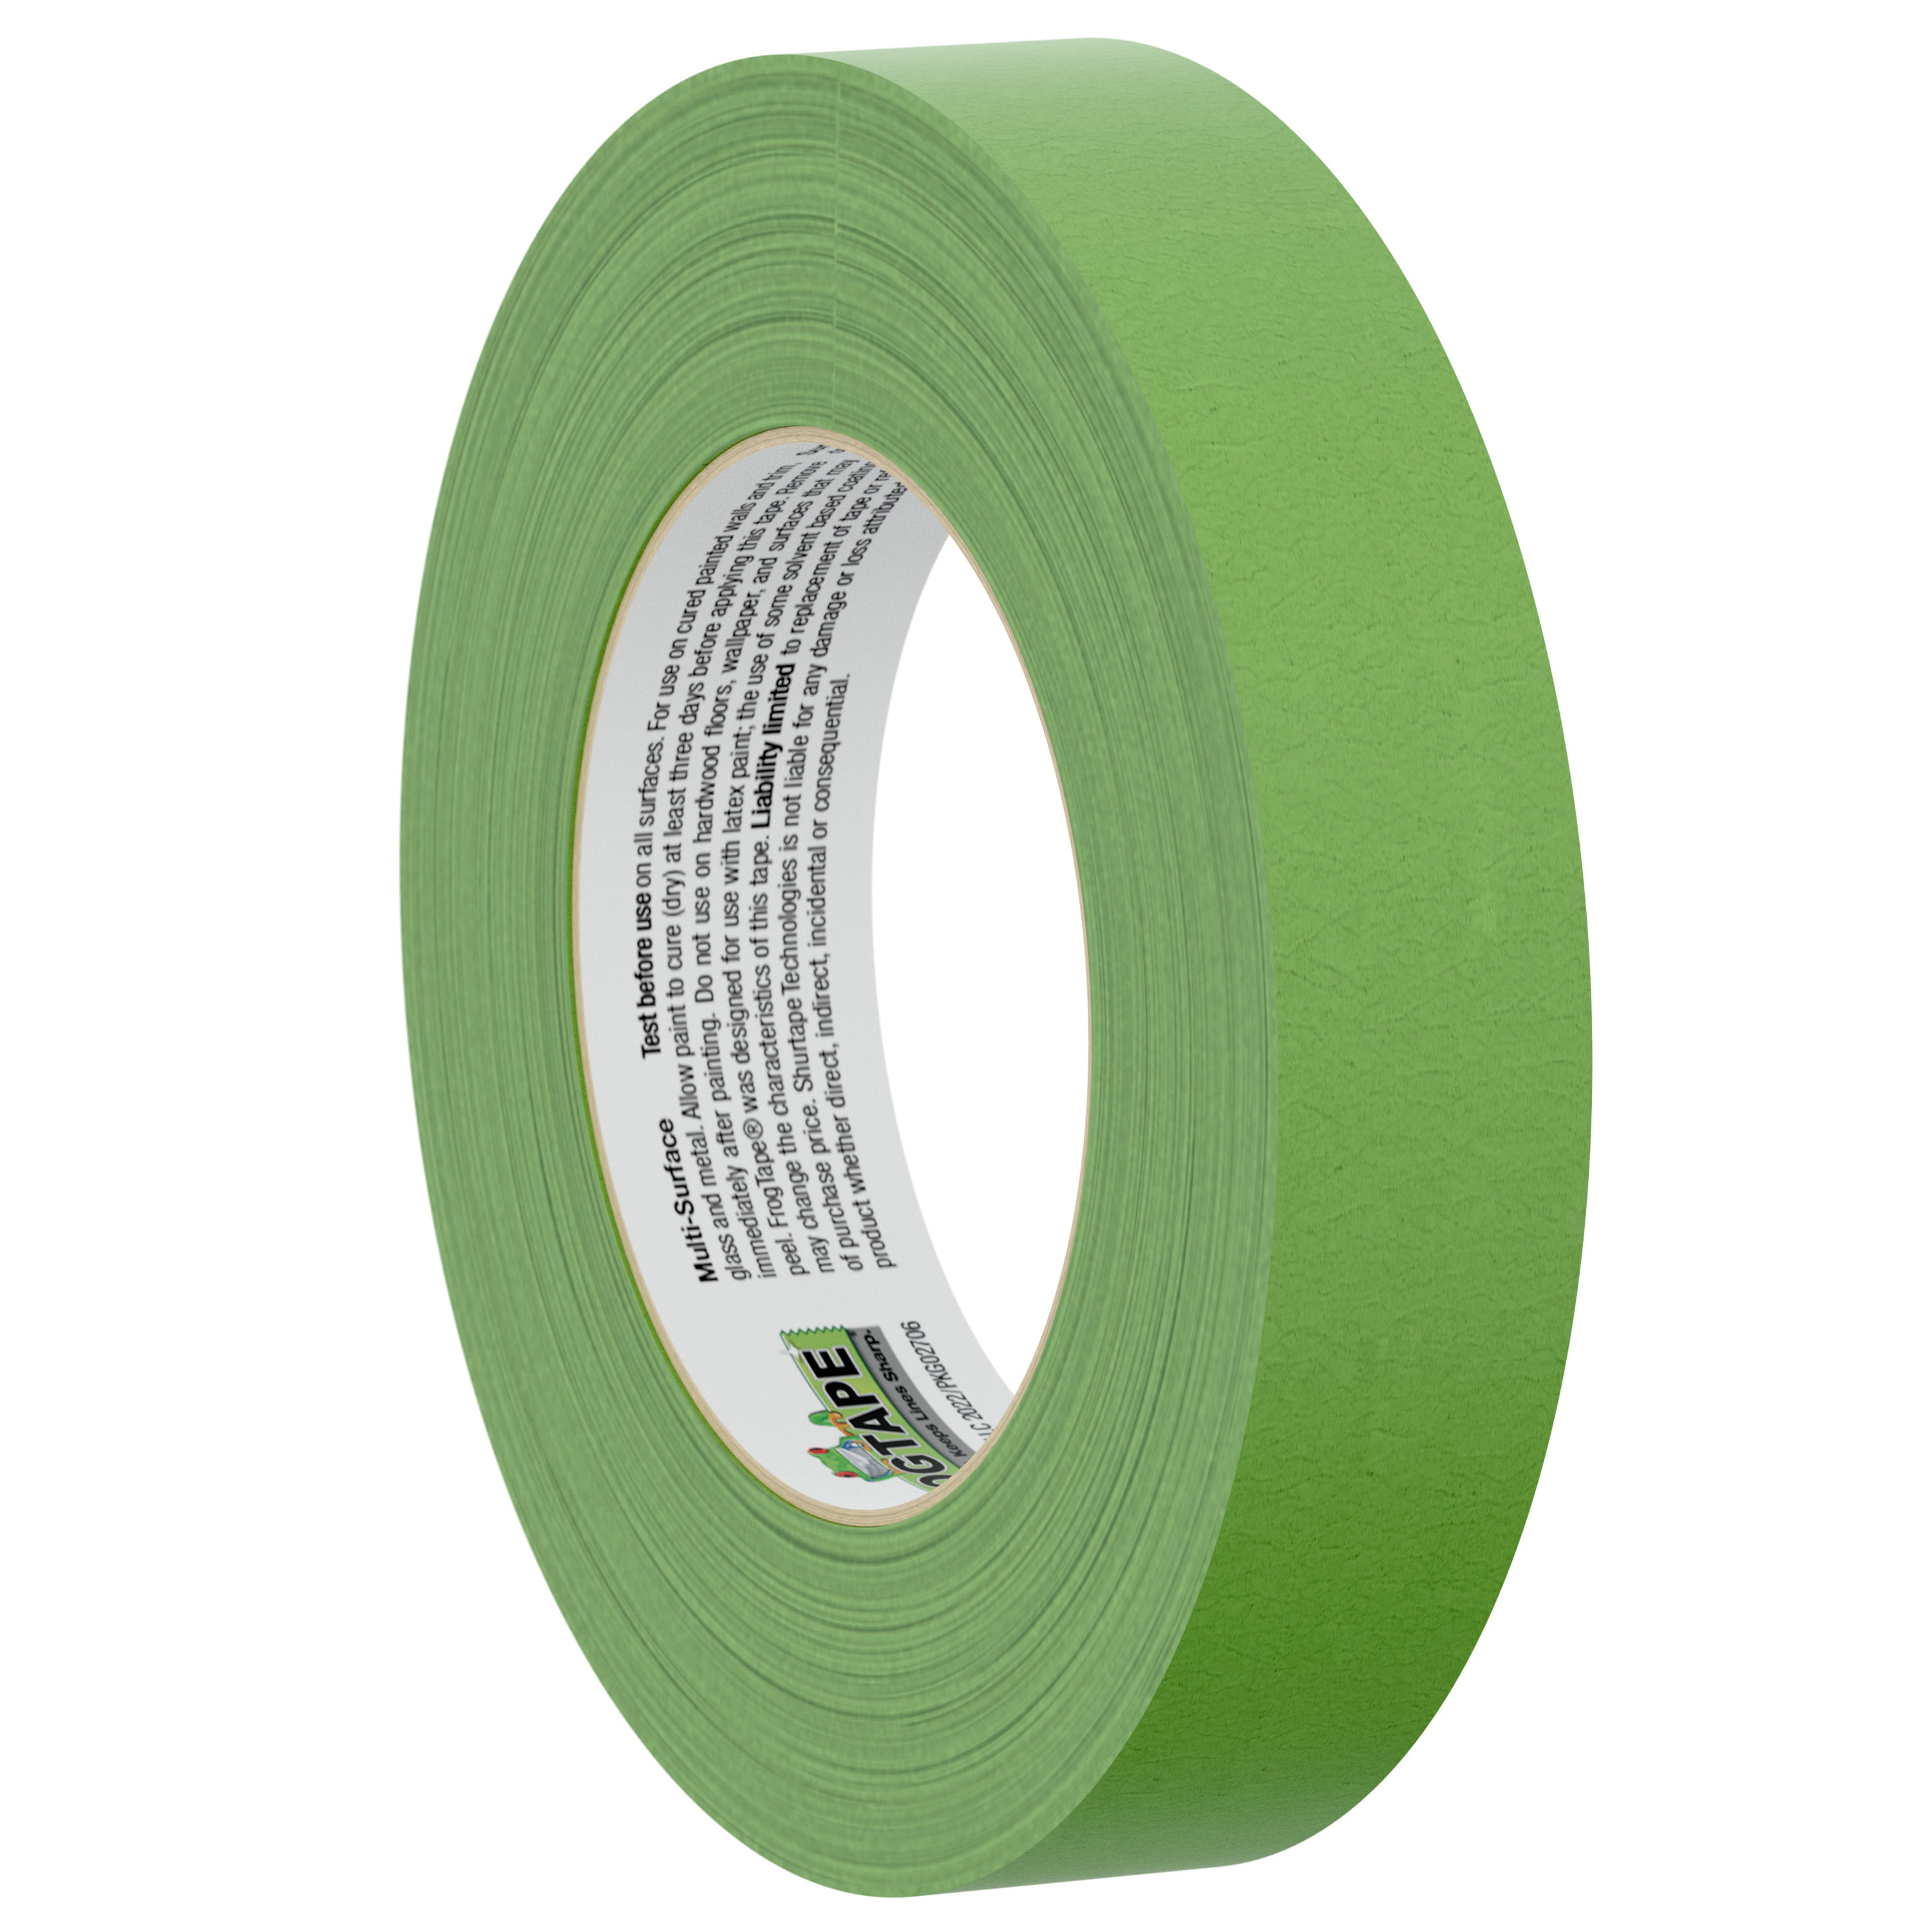 1 in x 60 yds Dark Green Colored Masking Tape